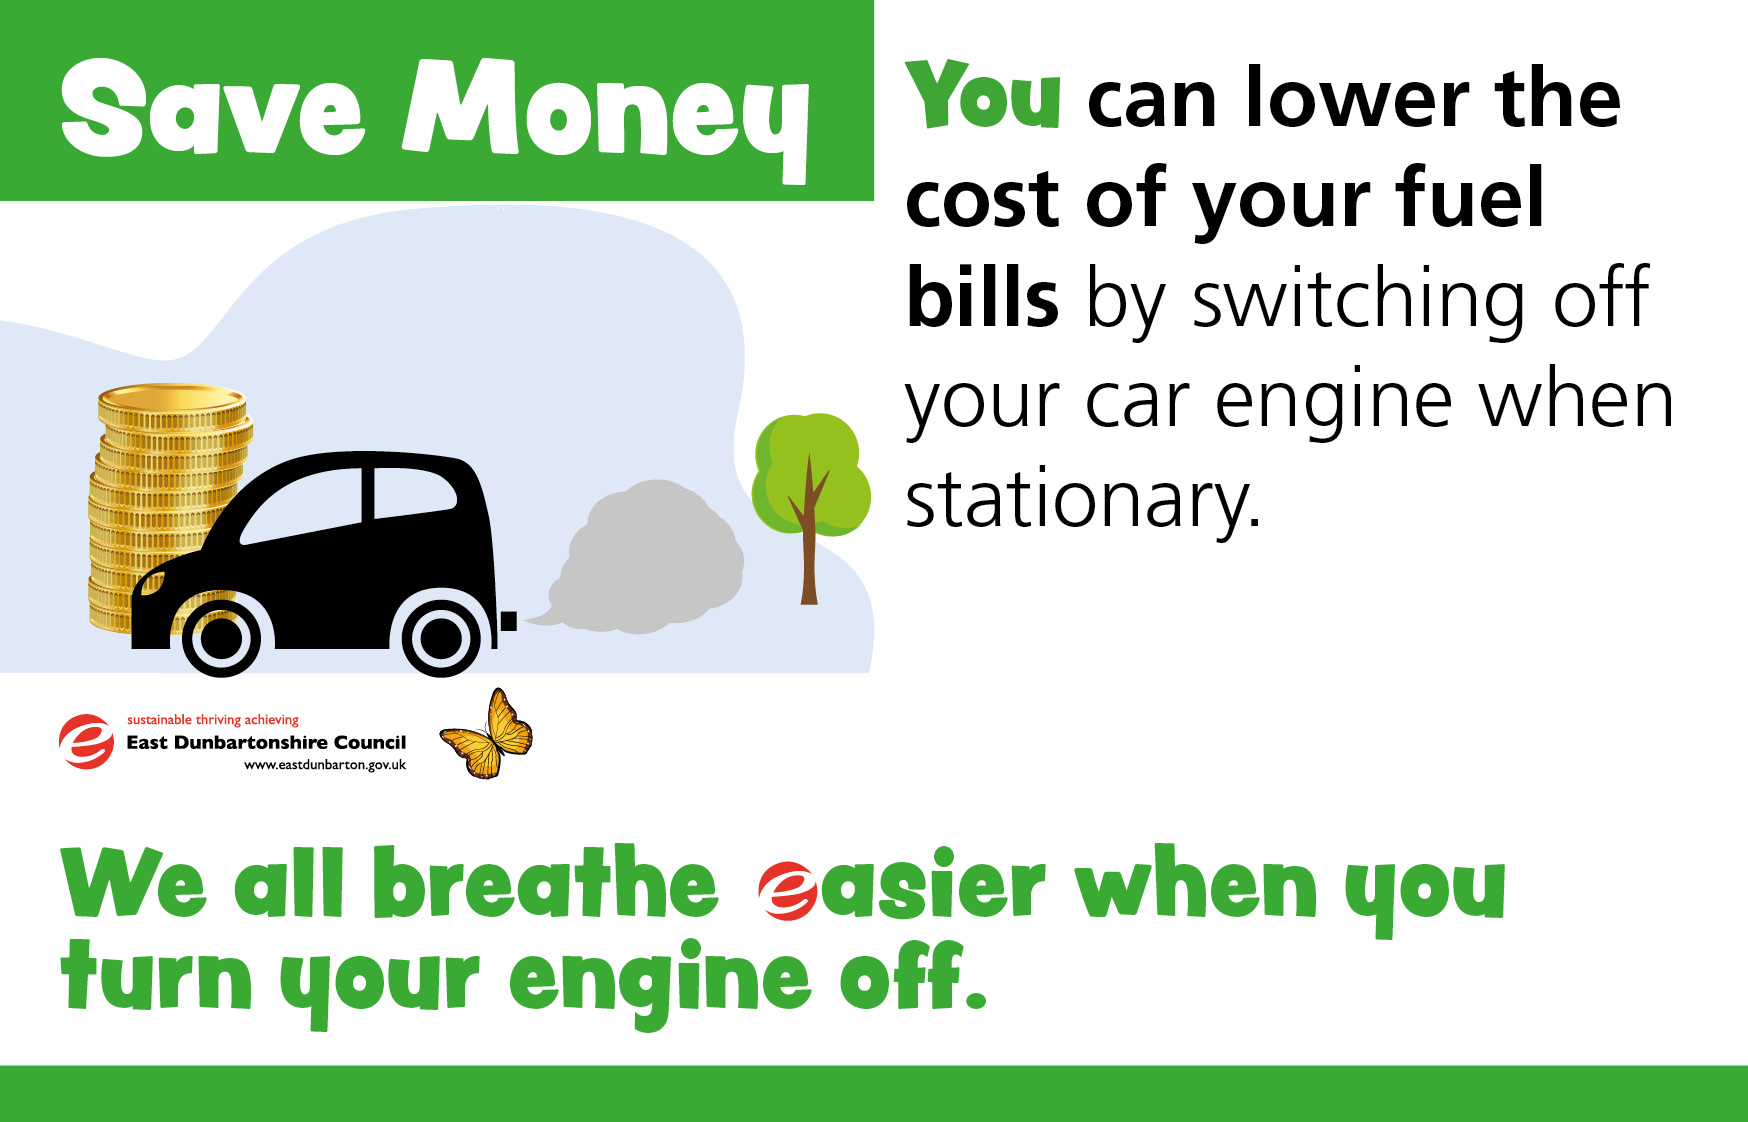 Save Money – You can lower the cost of your fuel bills by switching off your car engine when stationary.  We all breathe easier when you turn your engine off.)